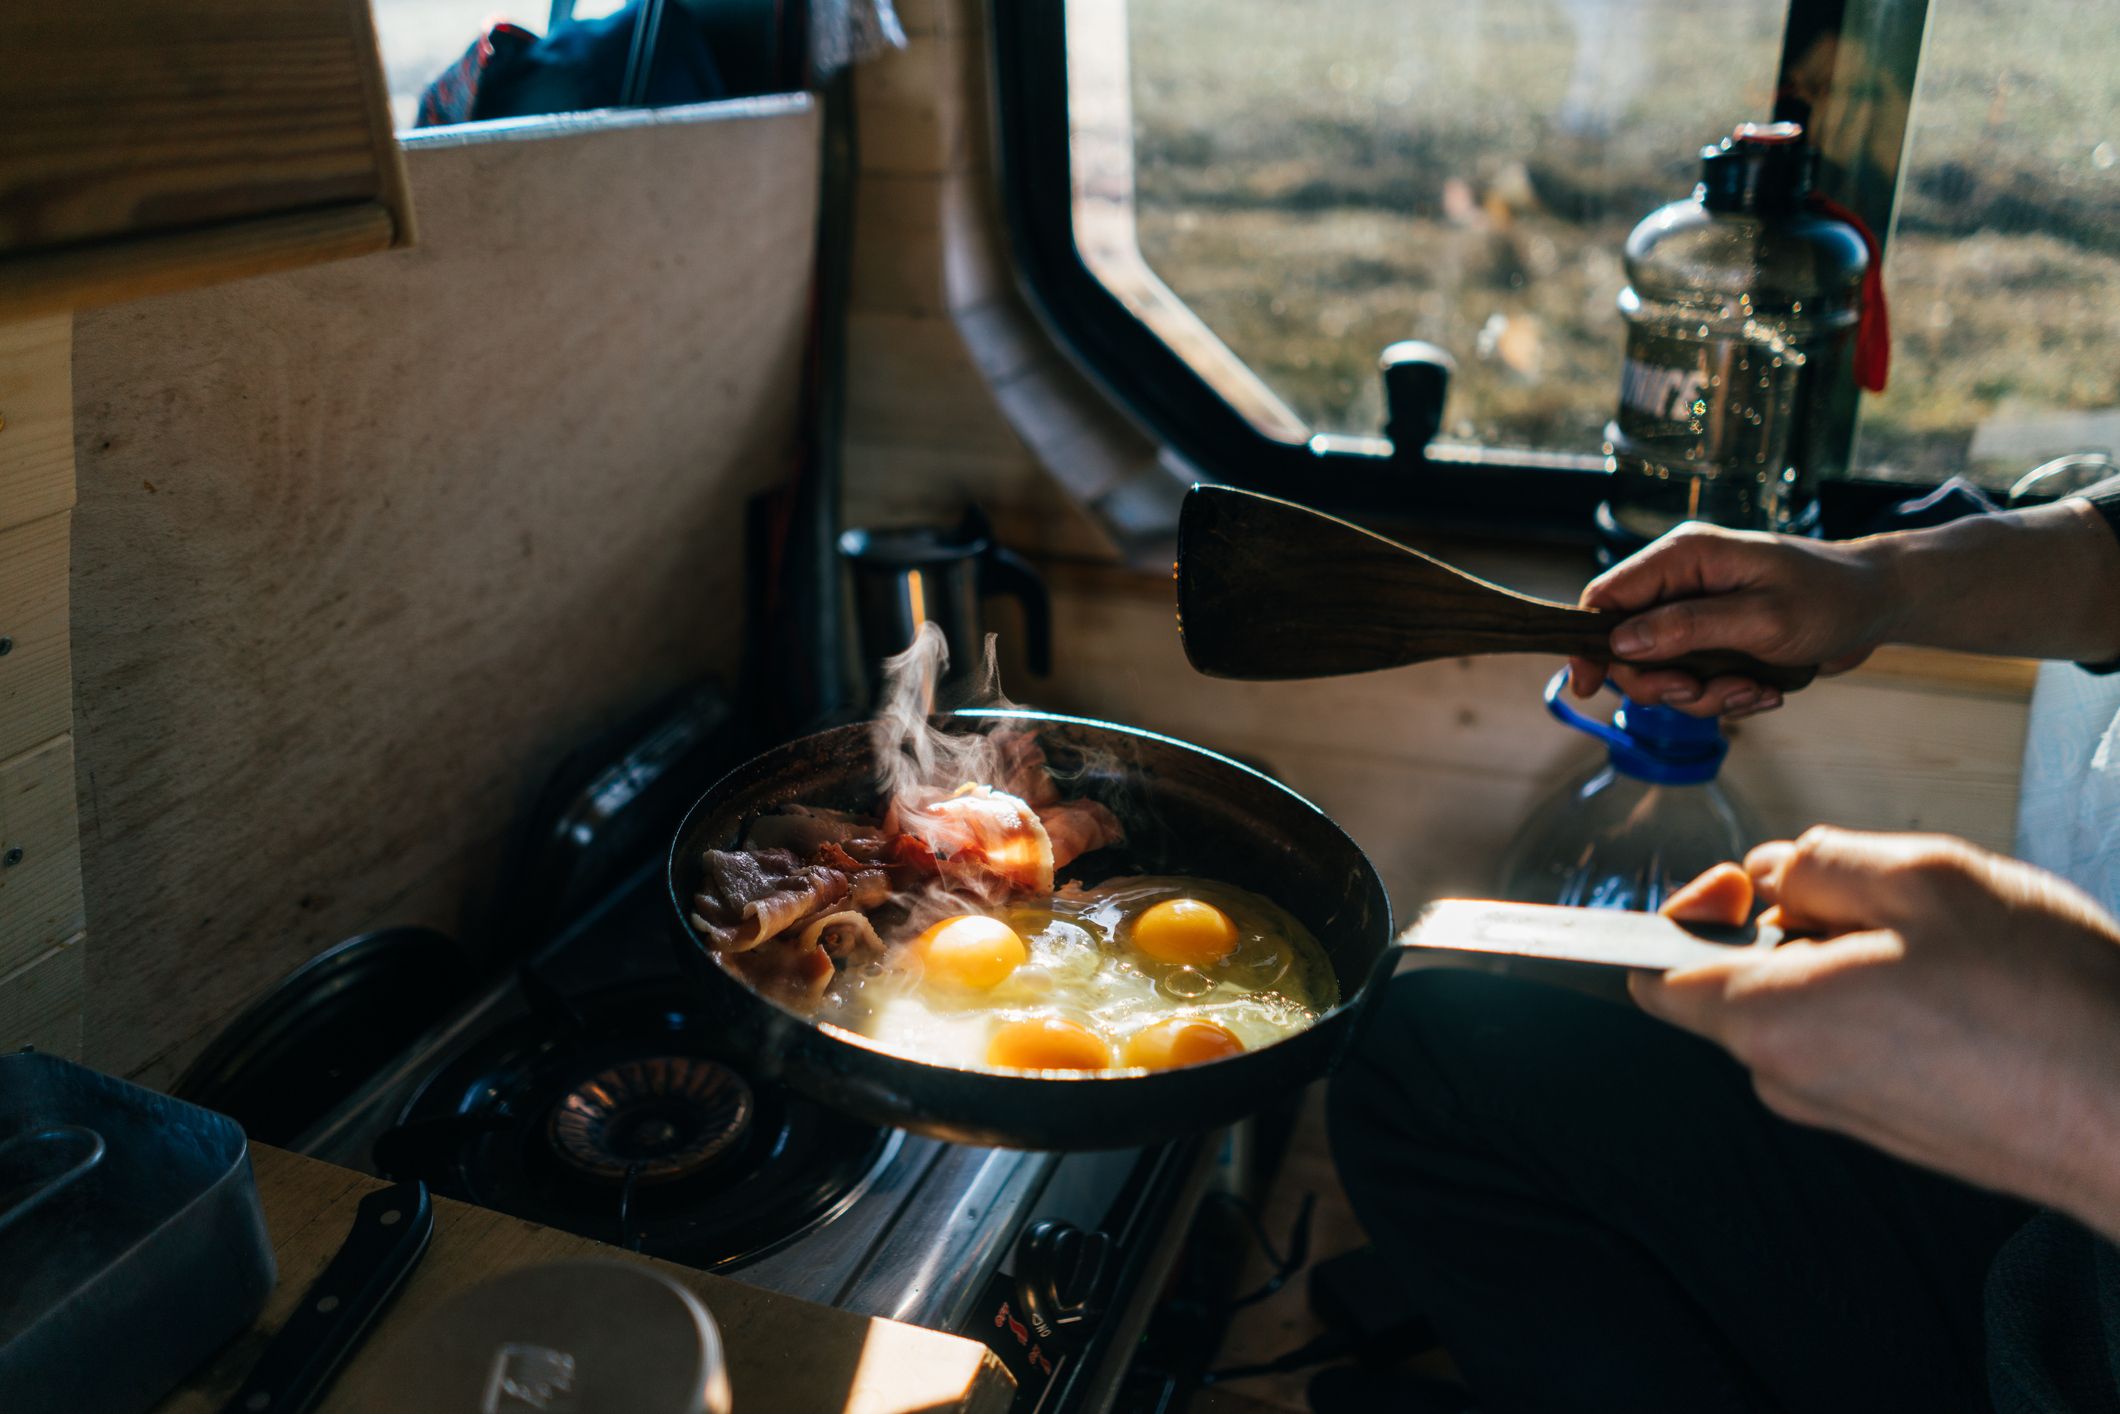 https://hips.hearstapps.com/hmg-prod/images/cooking-eggs-and-bacon-in-skillet-at-campsite-royalty-free-image-1700081441.jpg